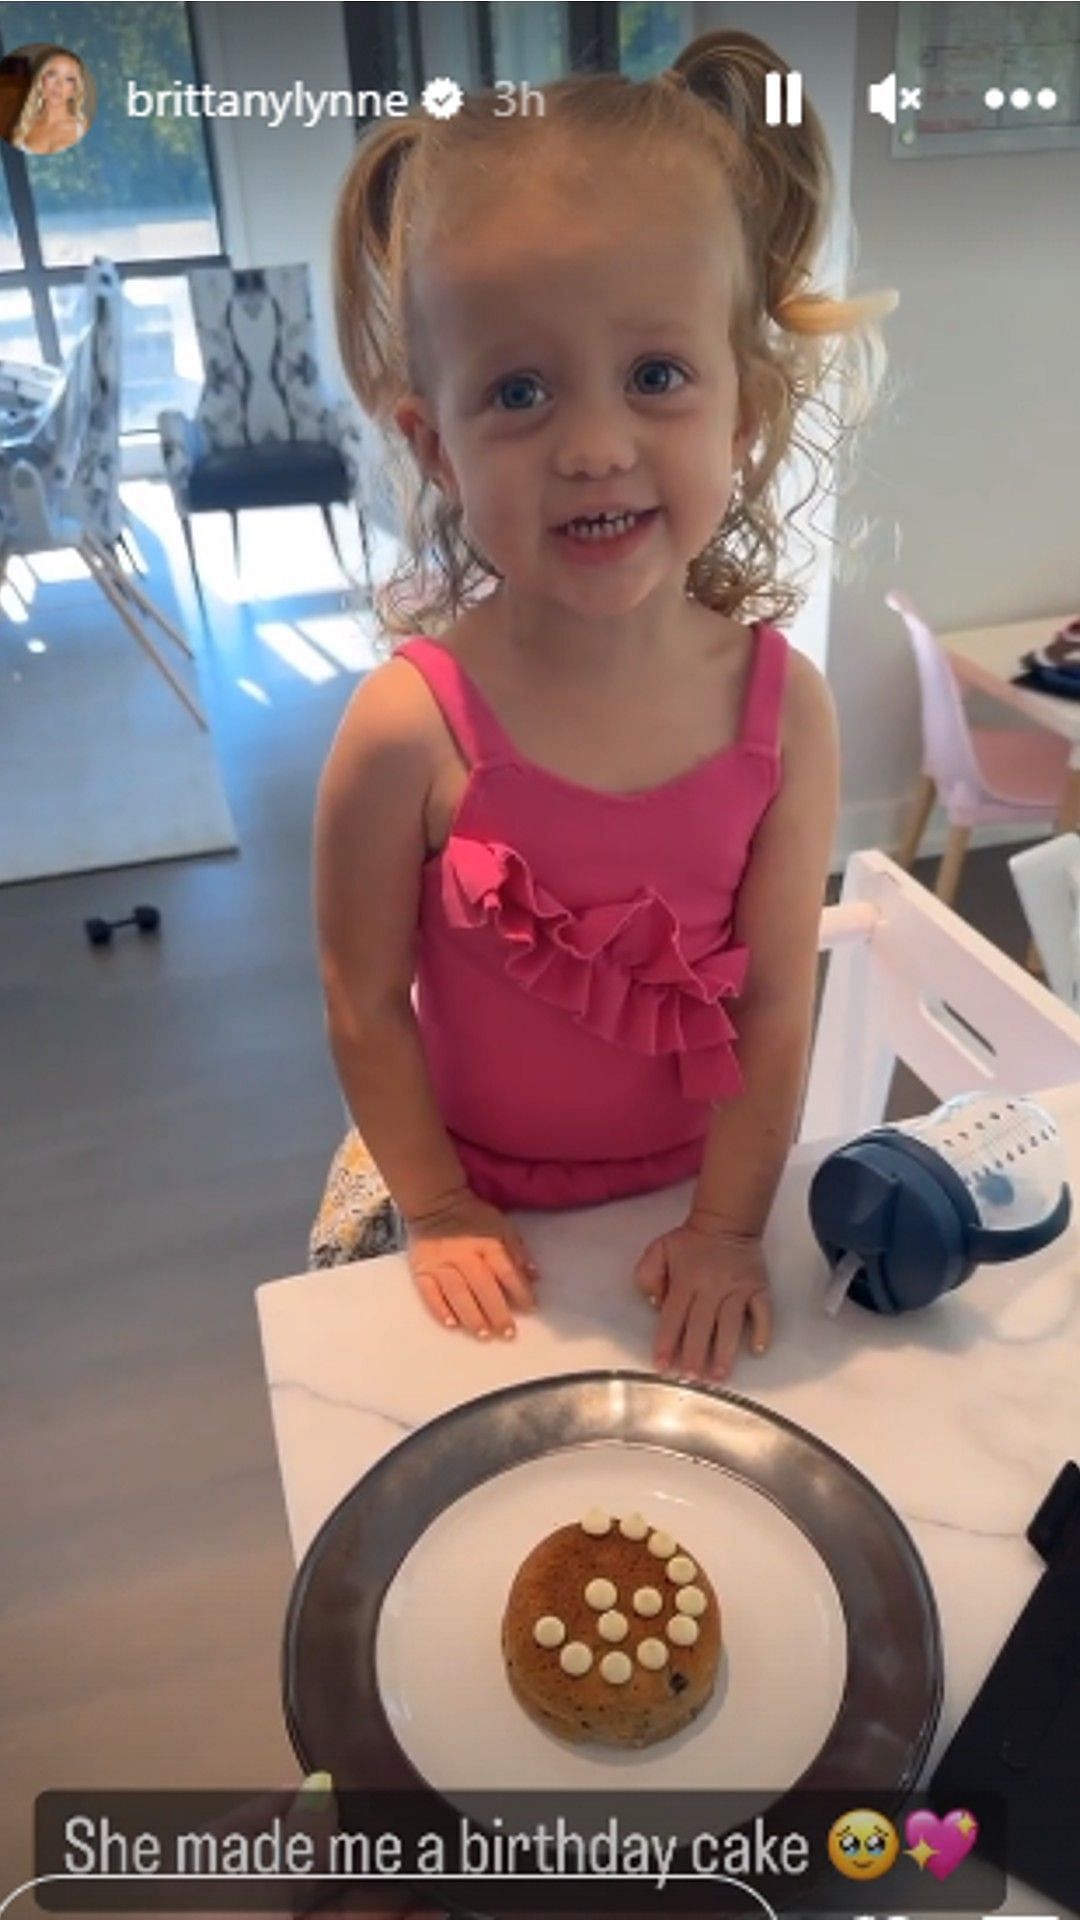 Brittany Mahomes shared her two-year-old daughter's precious gift on her birthday.